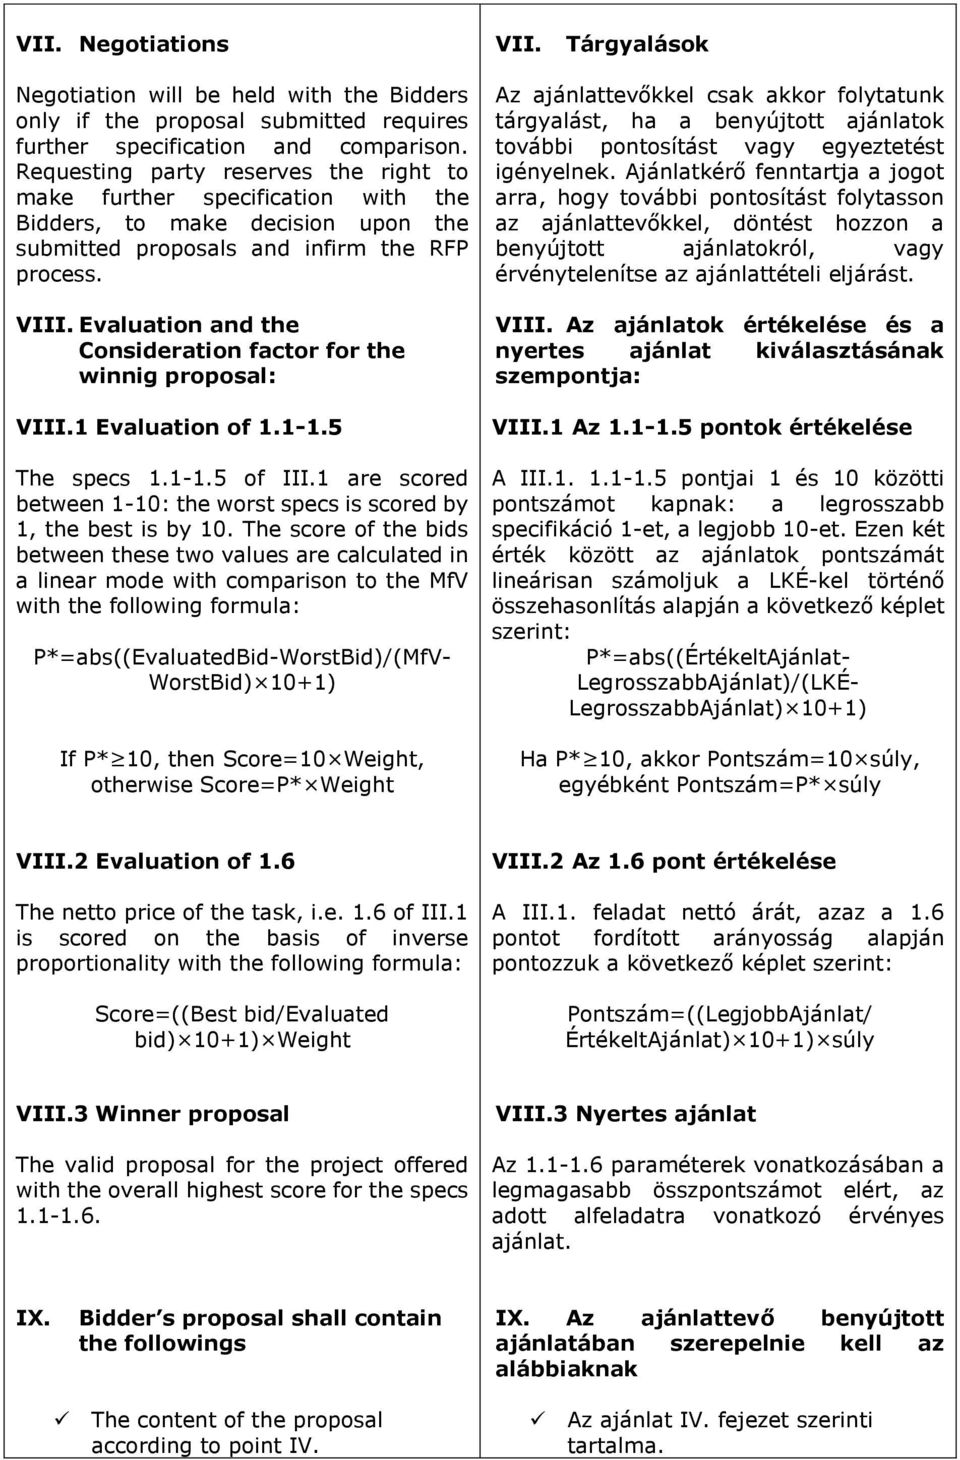 Evaluation and the Consideration factor for the winnig proposal: VIII.1 Evaluation of 1.1-1.5 The specs 1.1-1.5 of III.1 are scored between 1-: the worst specs is scored by 1, the best is by.